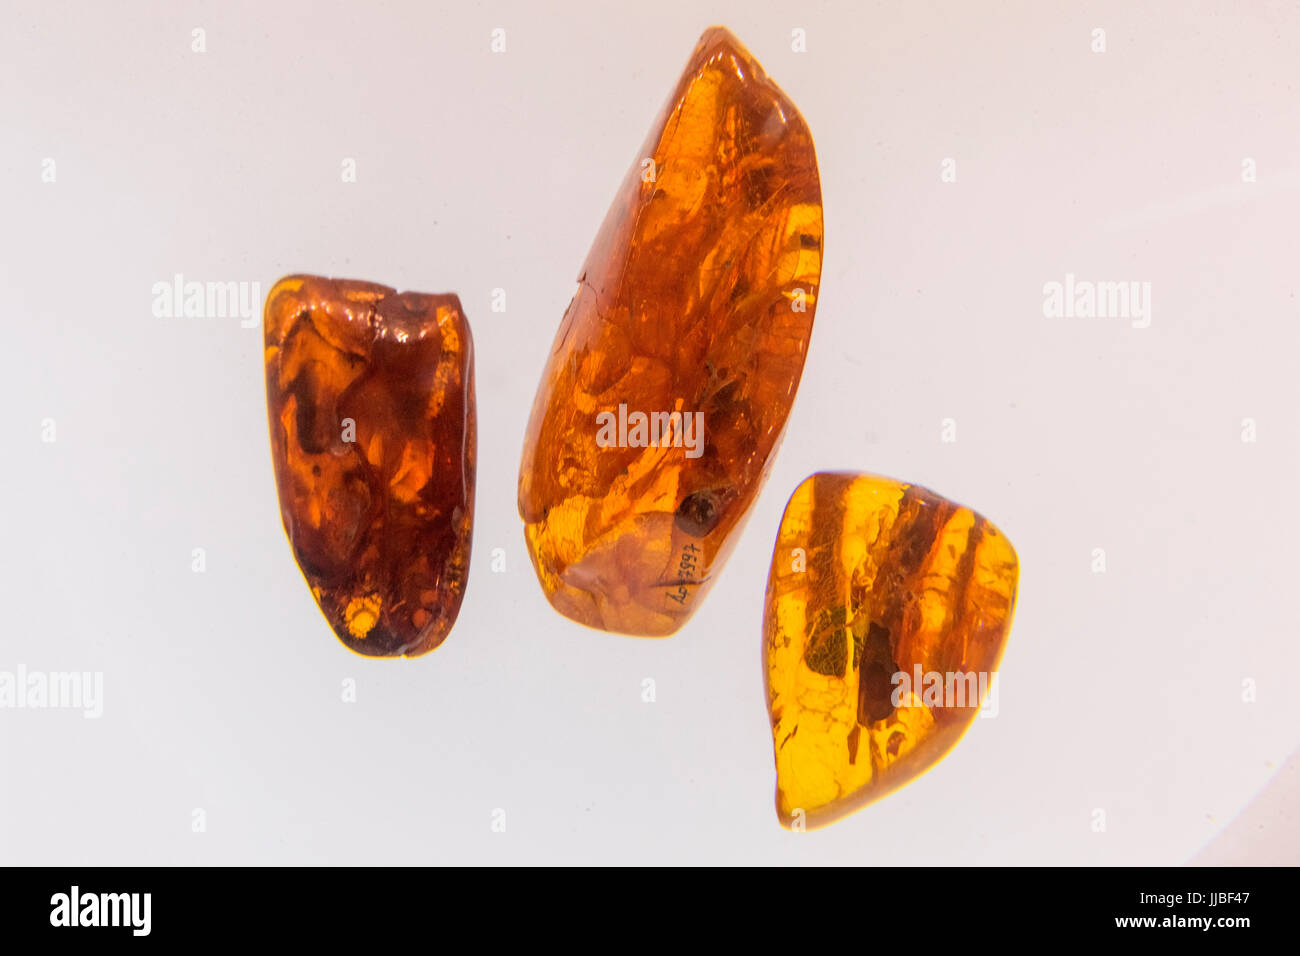 Exhibits from the amber museum, insects frozen in amber, Palanga, Lithuania. Stock Photo